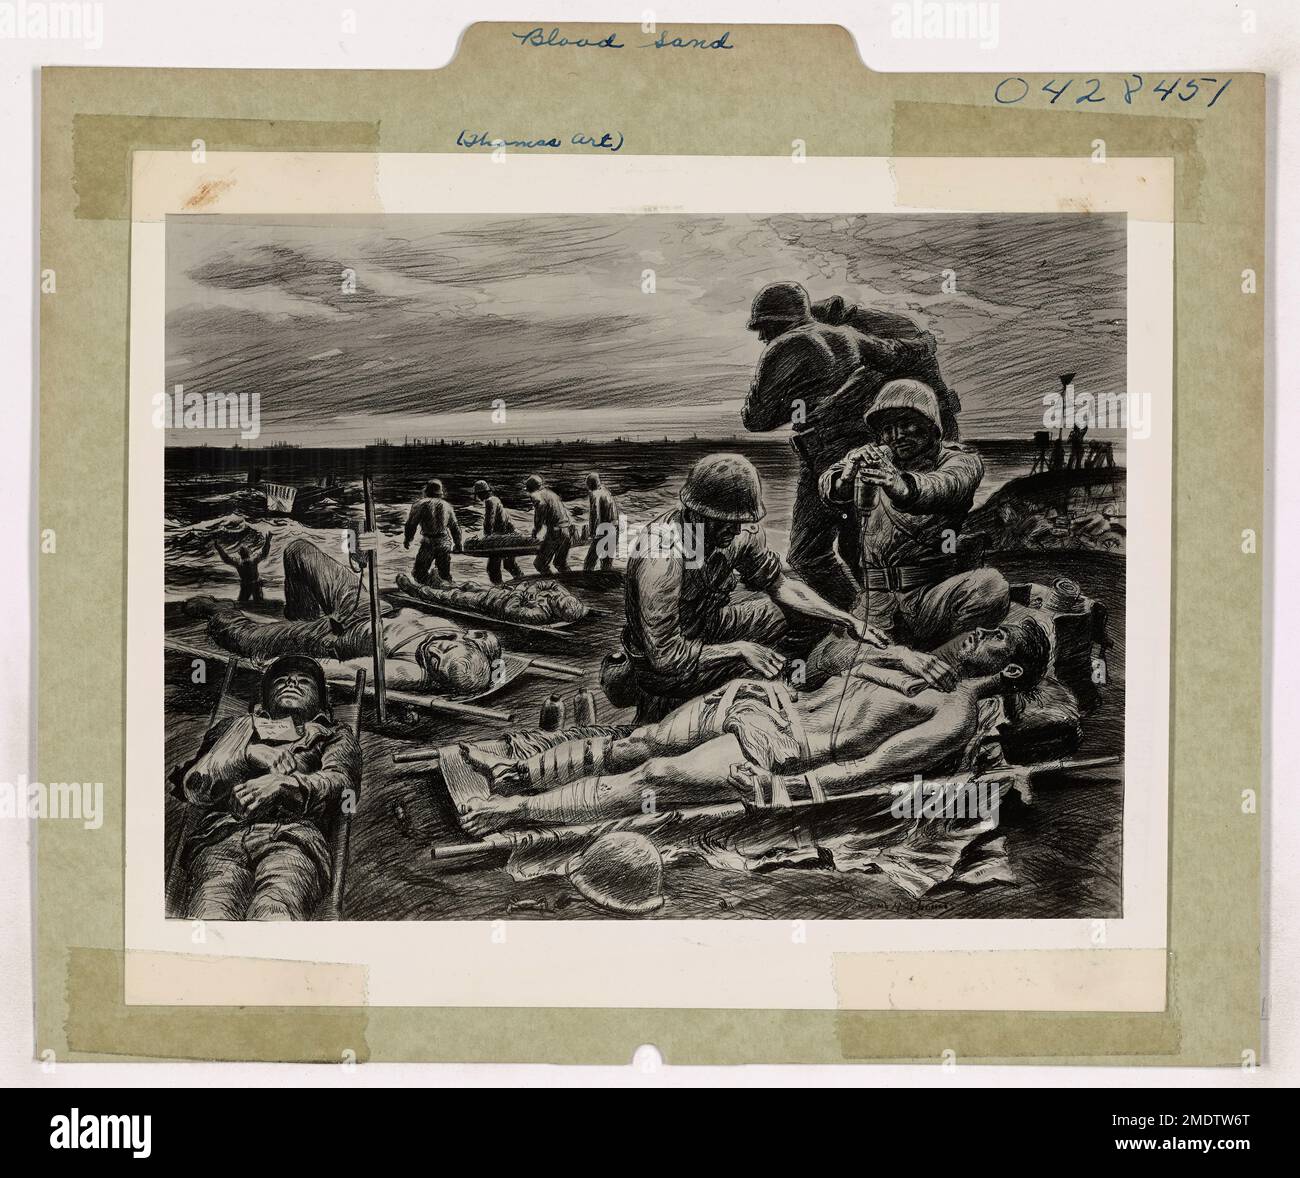 Blood and Sand. This image depicts Marines and Coast Guardsmen giving aid to wounded men on the beaches of Iwo Jima, drawn by Coast Guard Combat Artist Norman Millet Thomas. Stock Photo